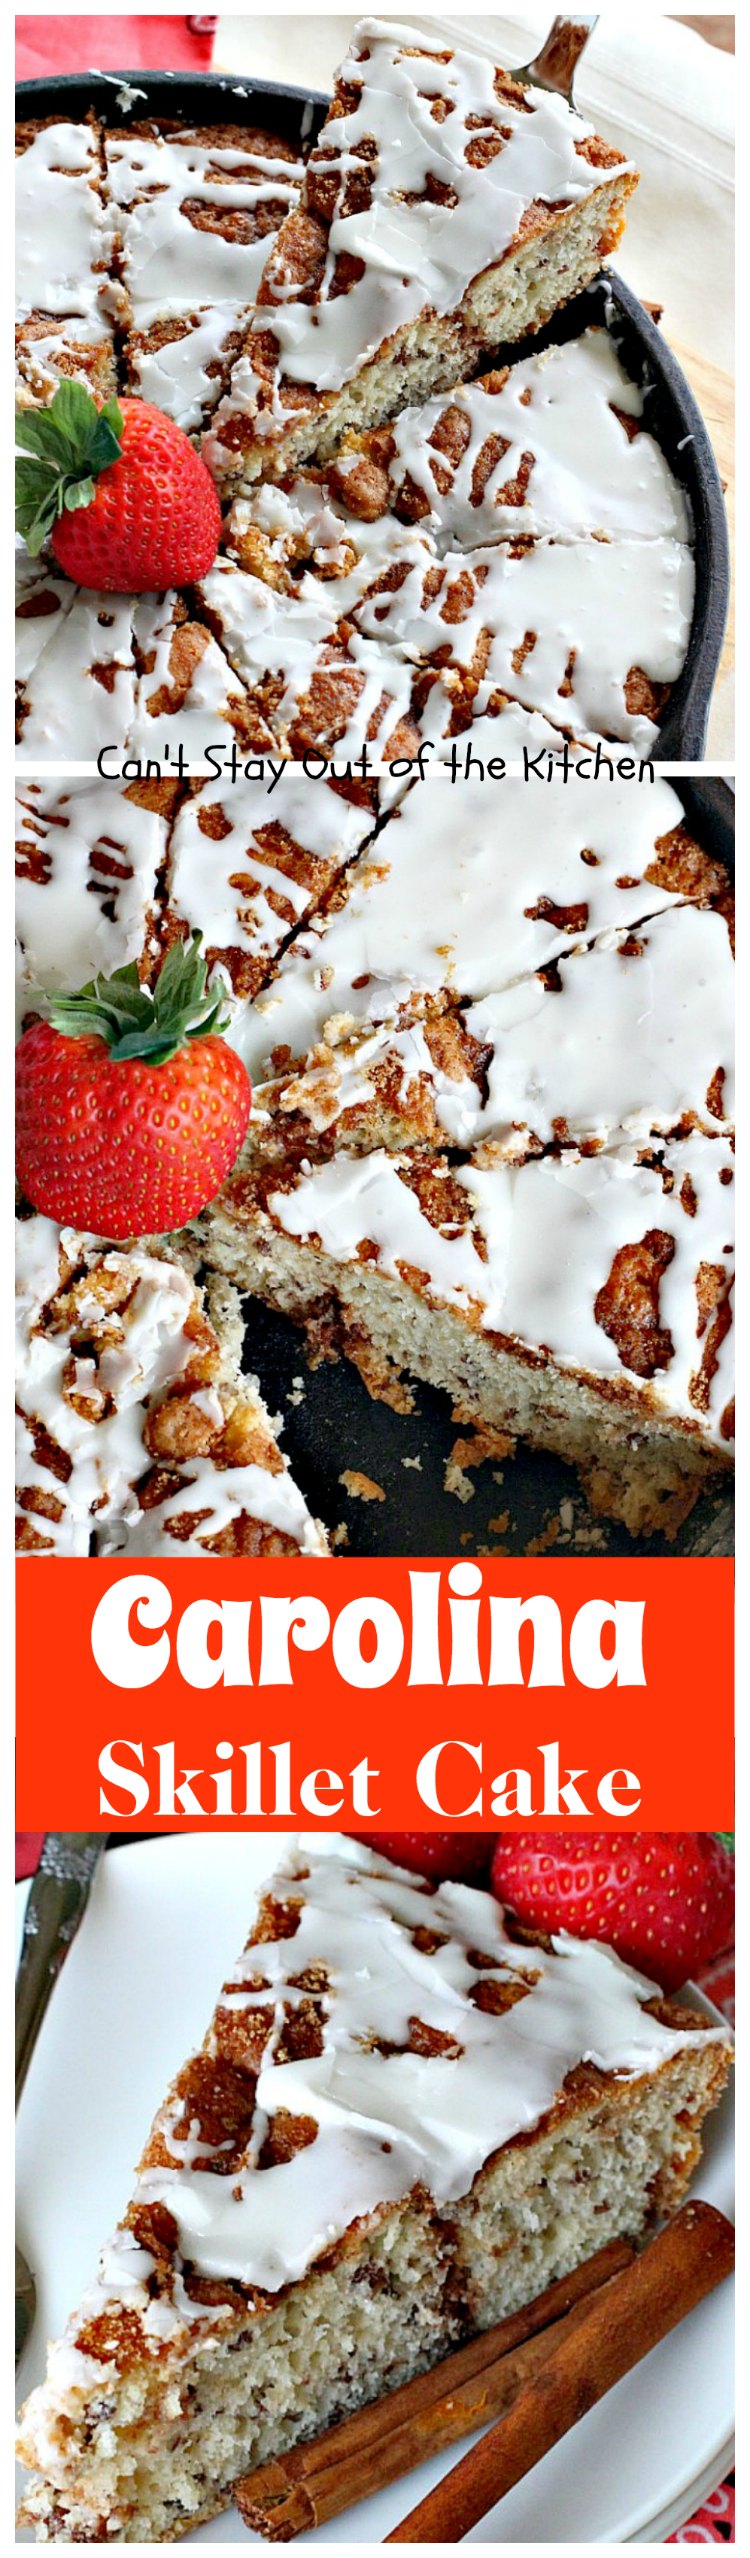 Carolina Skillet Cake | Can't Stay Out of the Kitchen